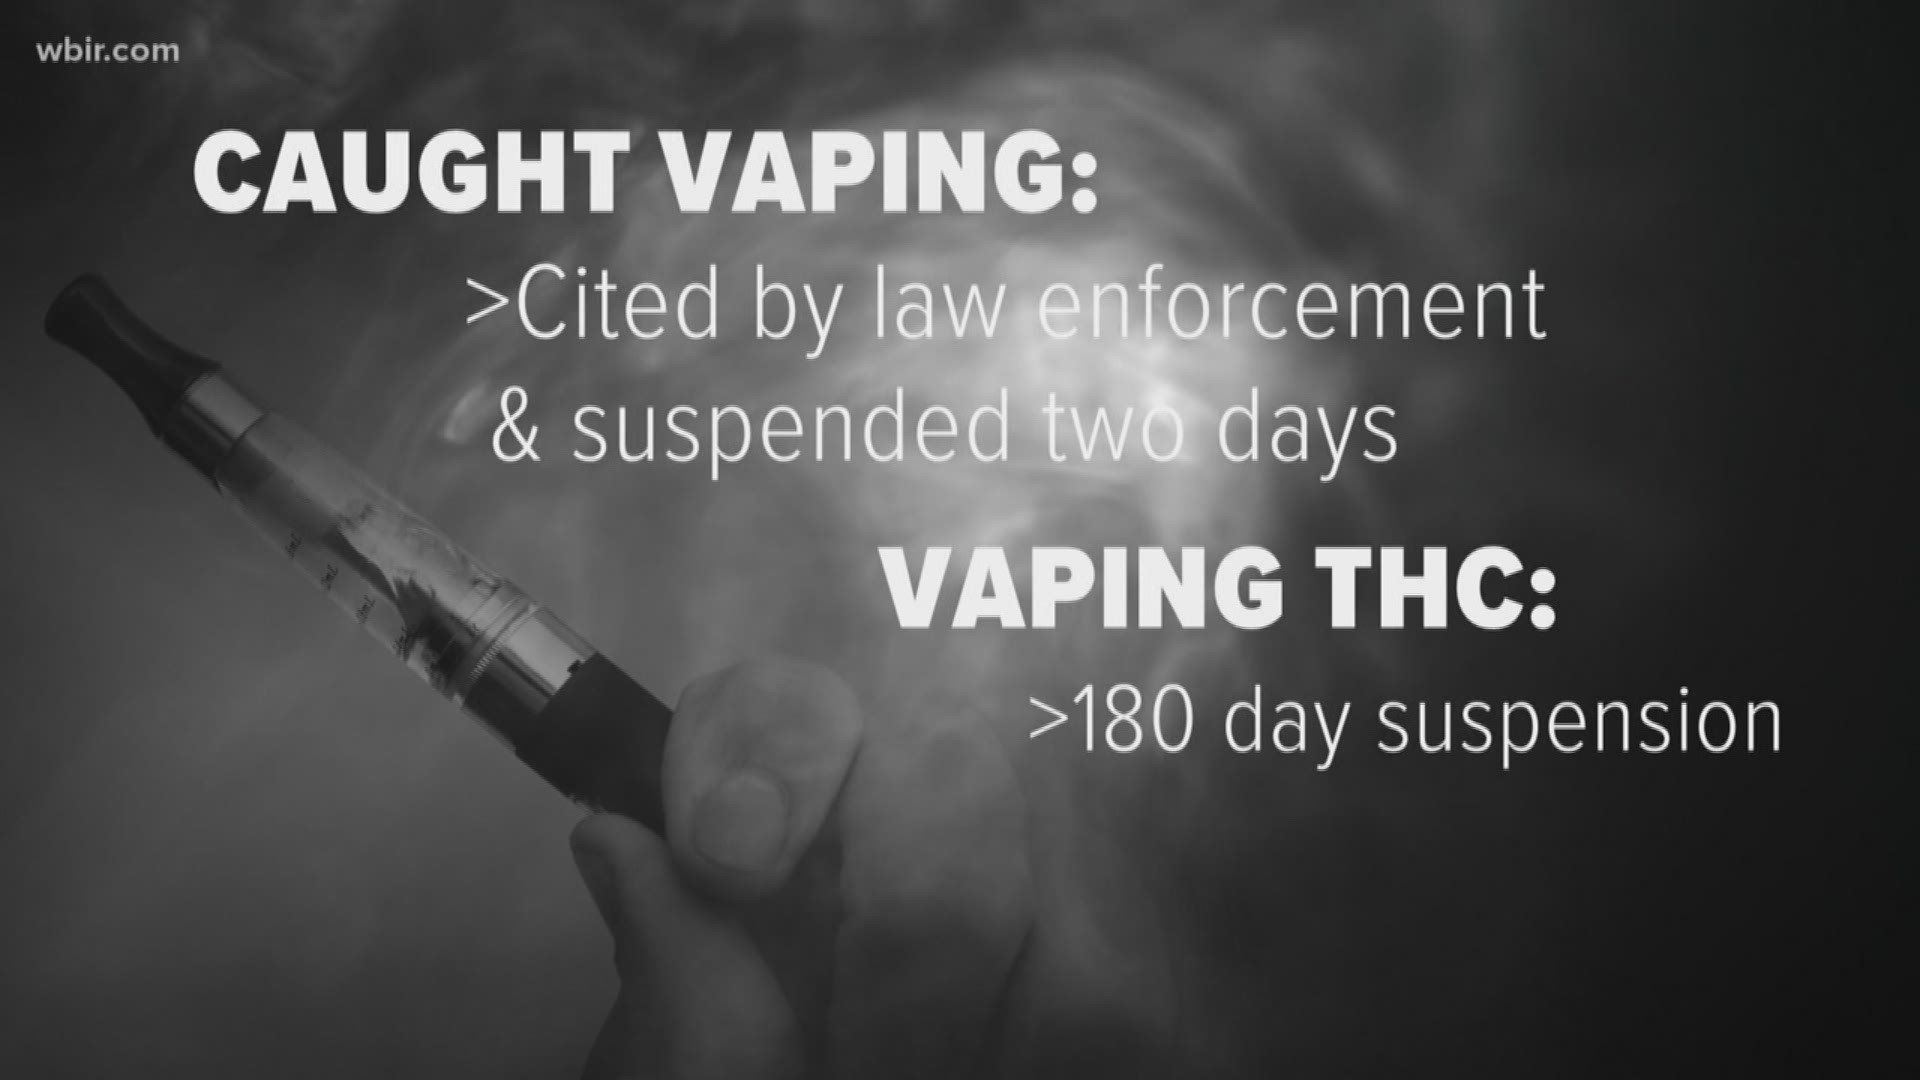 Under the new policy, the school is taking a zero-tolerance policy for vaping THC which will result in a 180-day suspension with alternative placement.